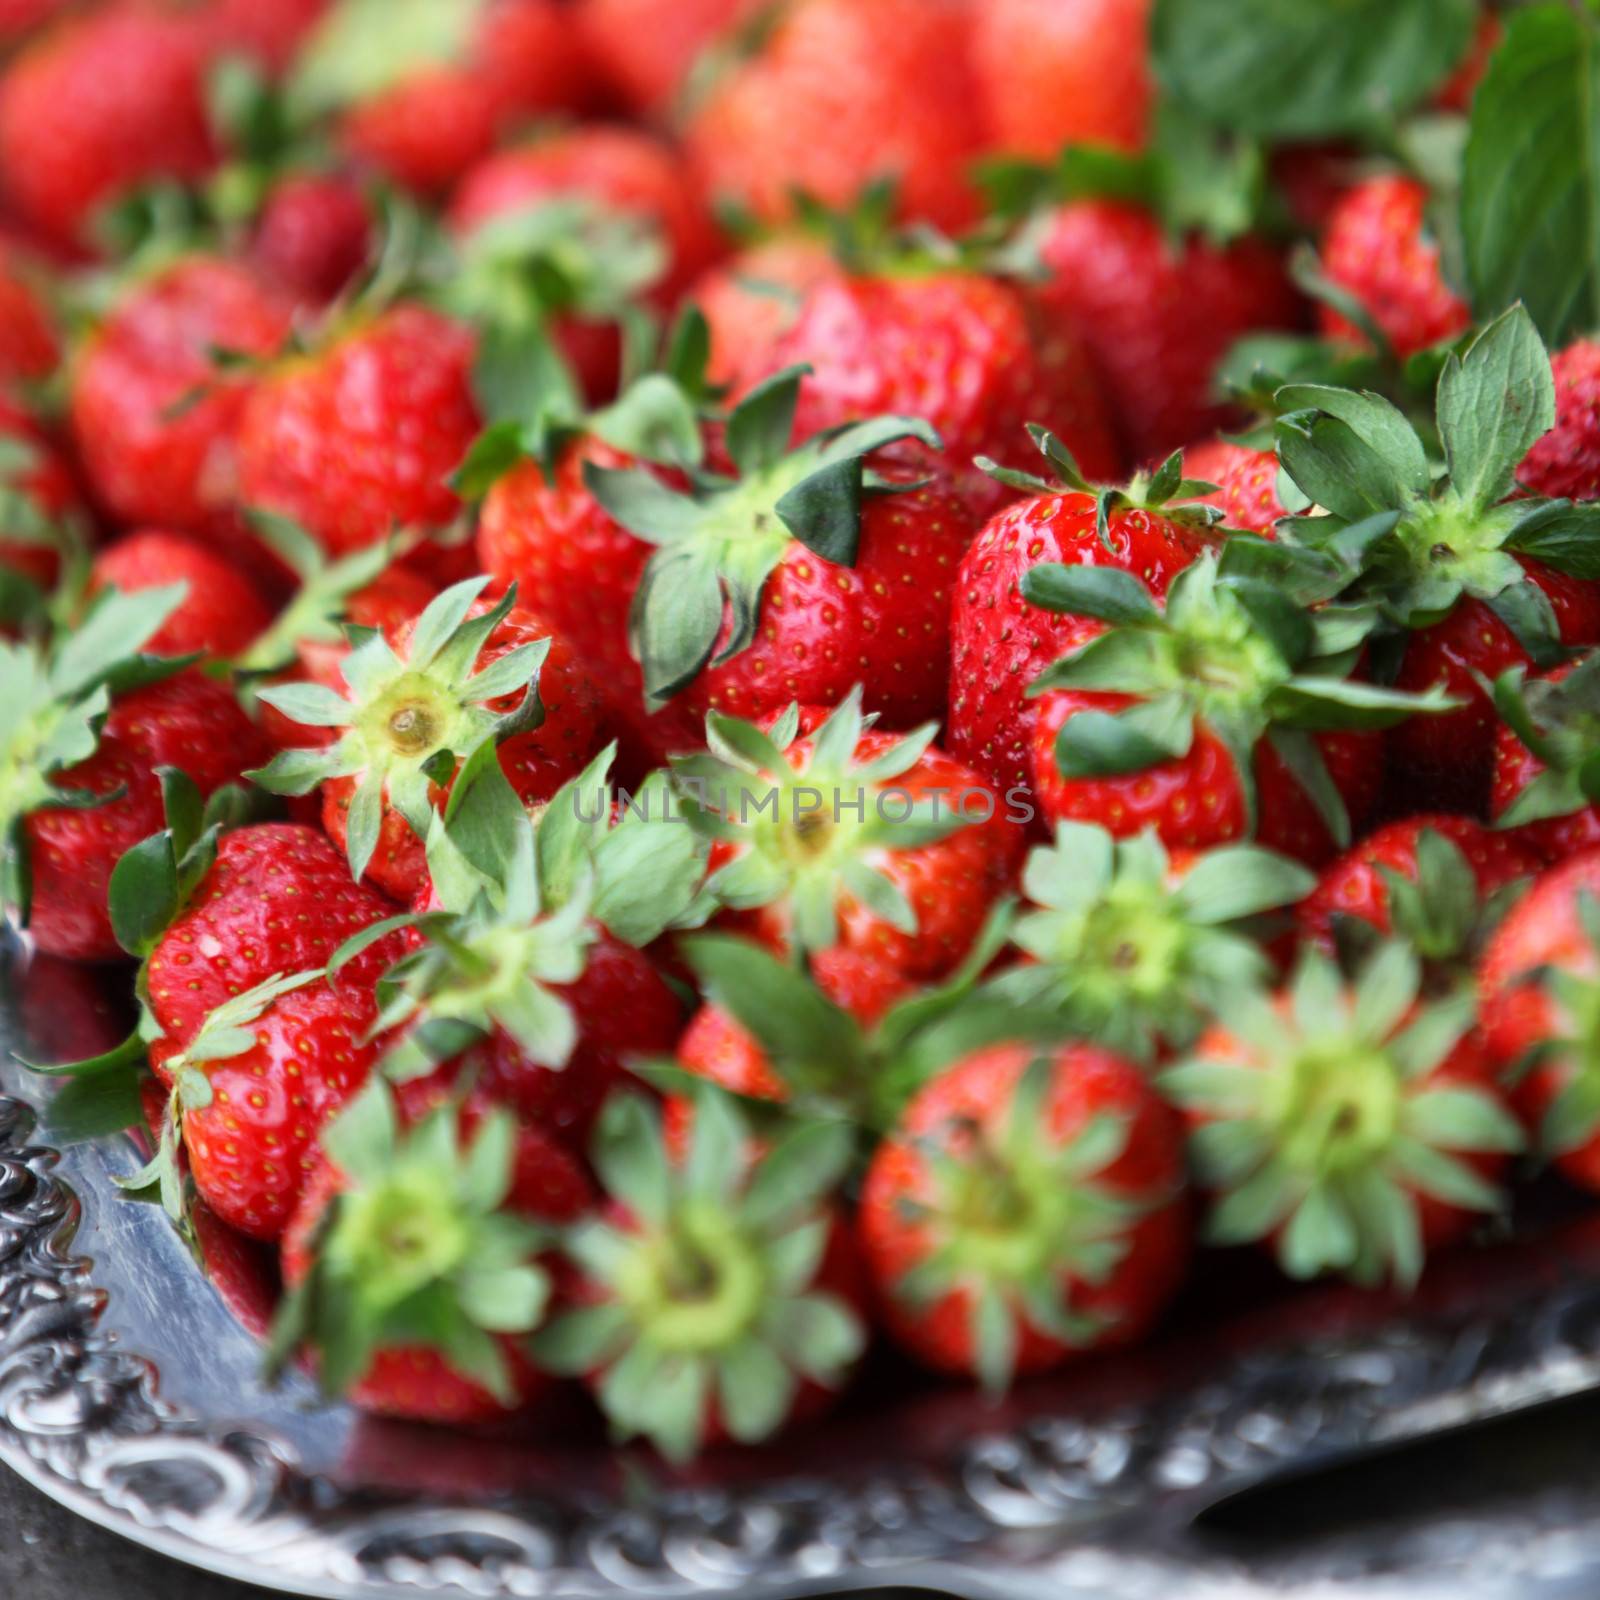 Close-up of a silver tray and fresh red strawberries